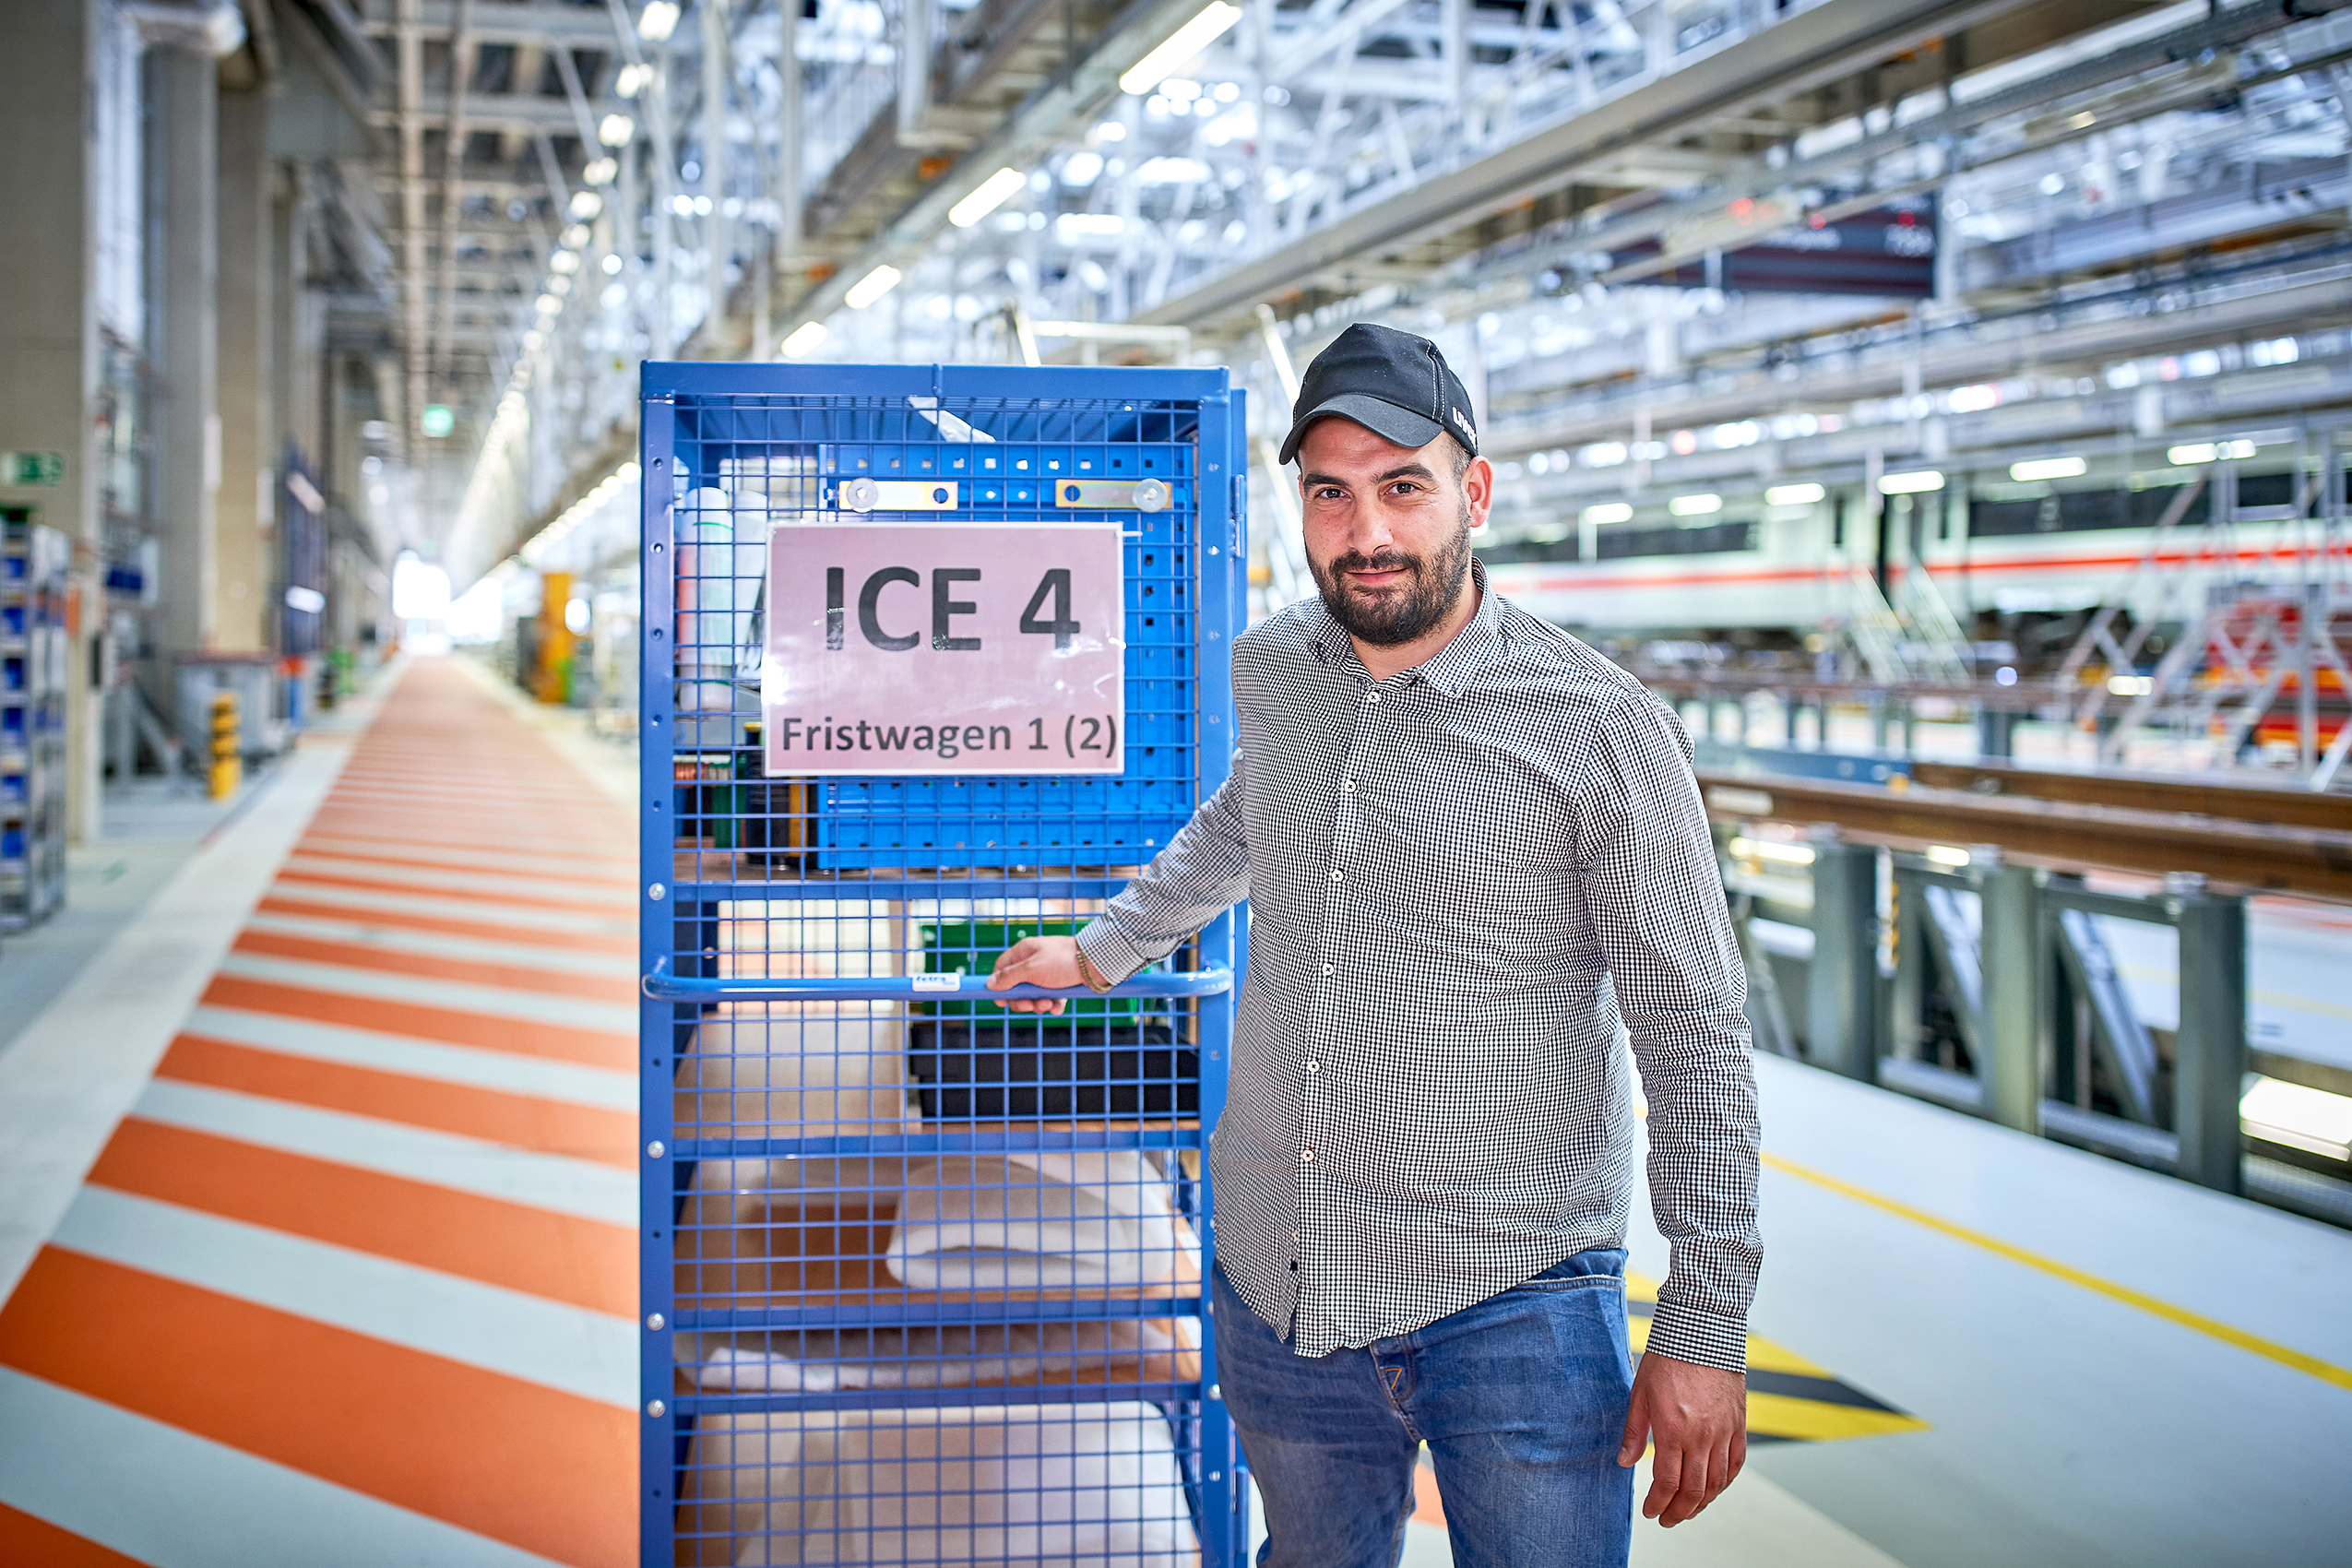 “I send replacement parts to my colleagues for installation right at the track. On time and in perfect quality.”<br/>Emre Ibis, Materials management specialist